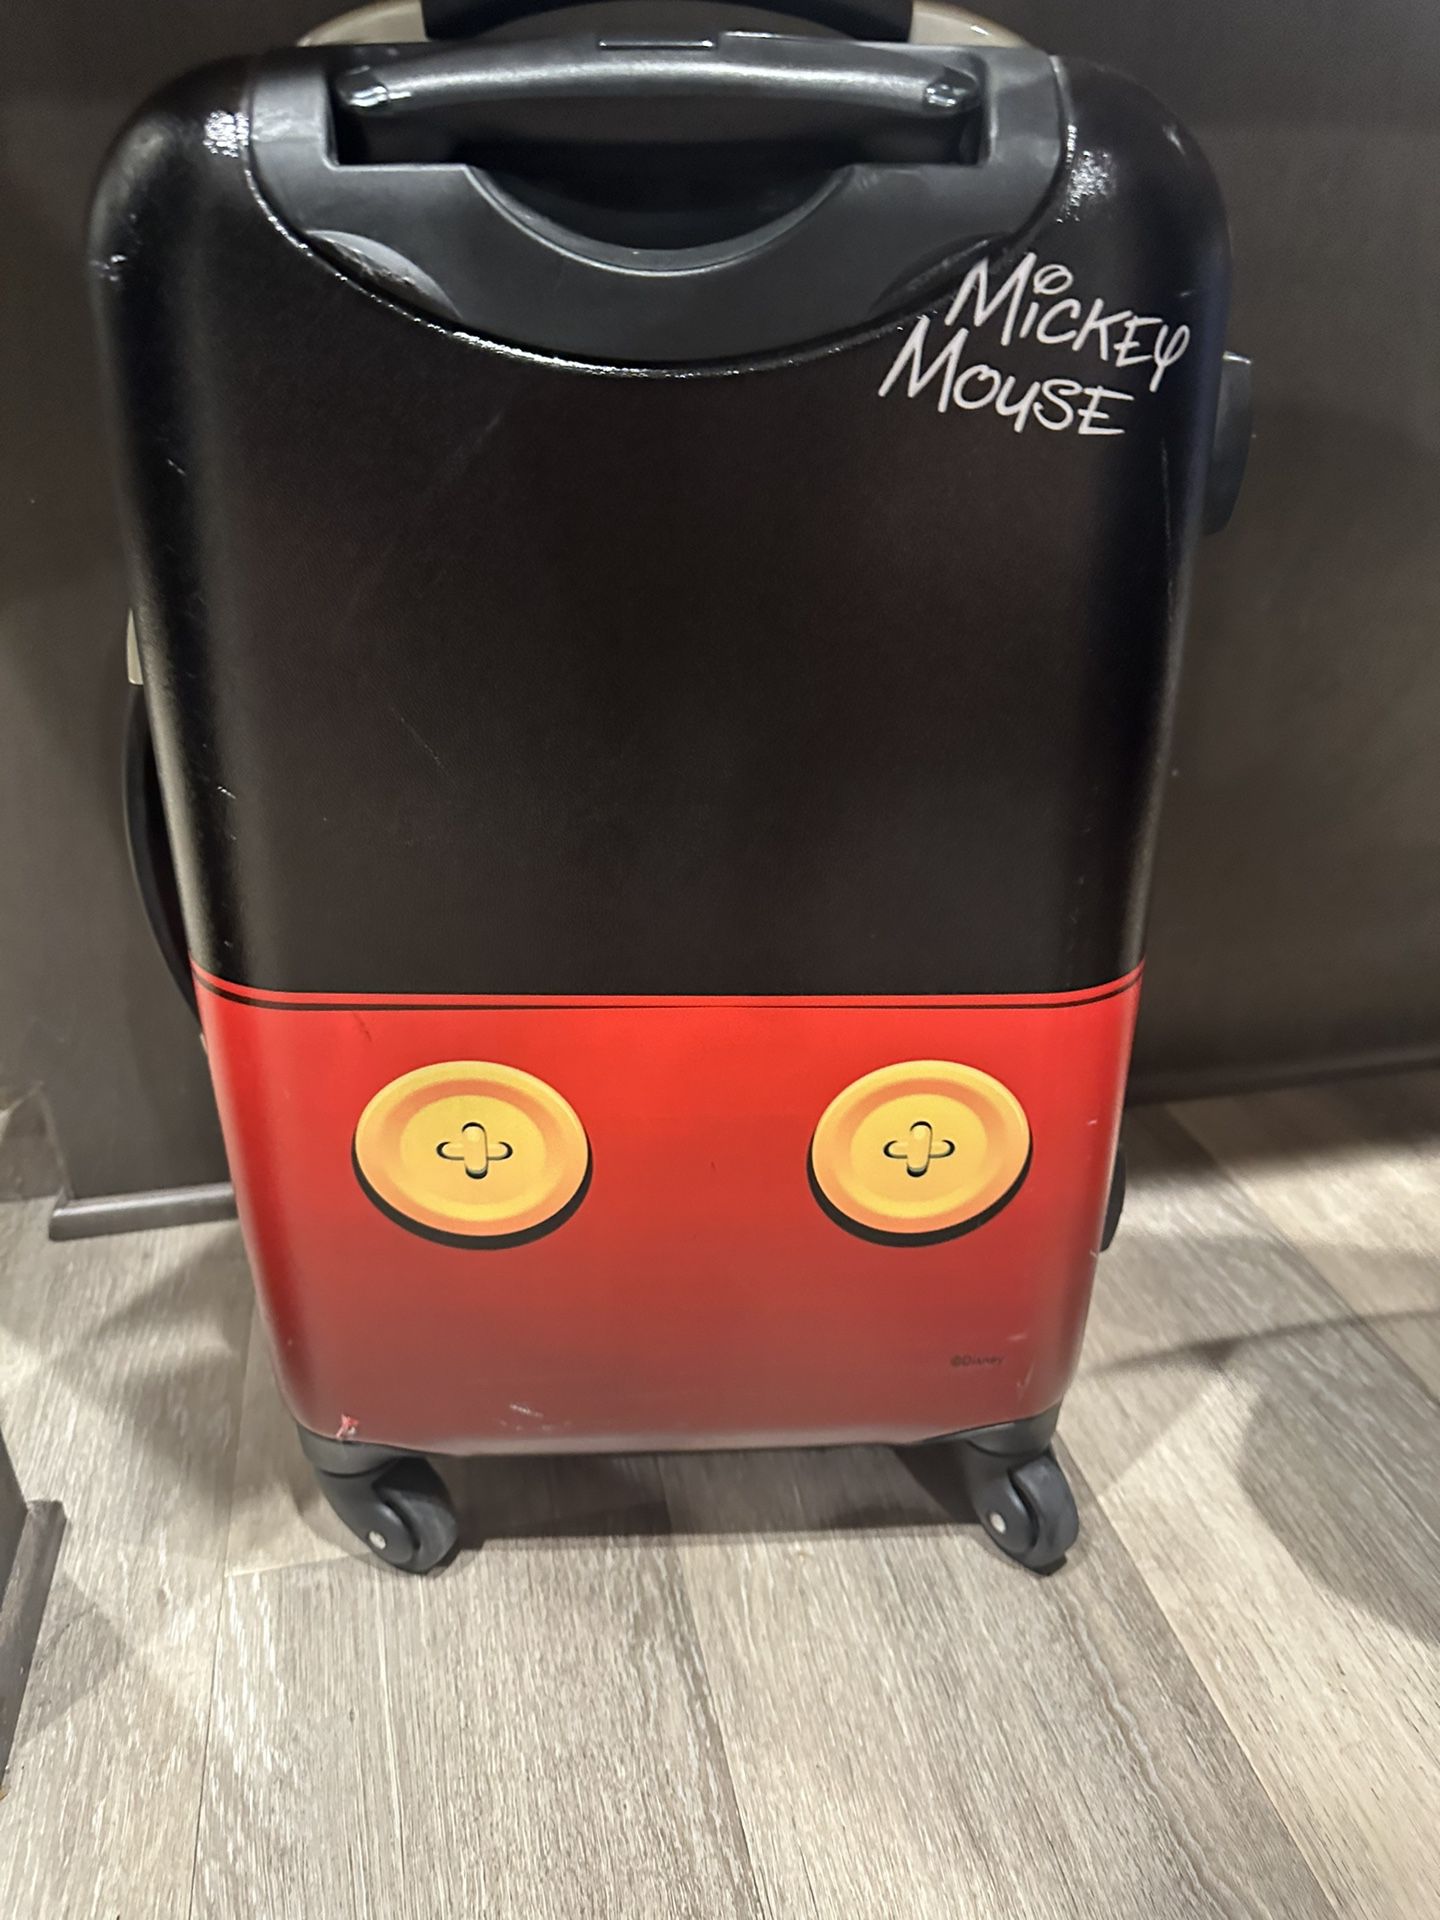 Disney Mickey Mouse Suitcase